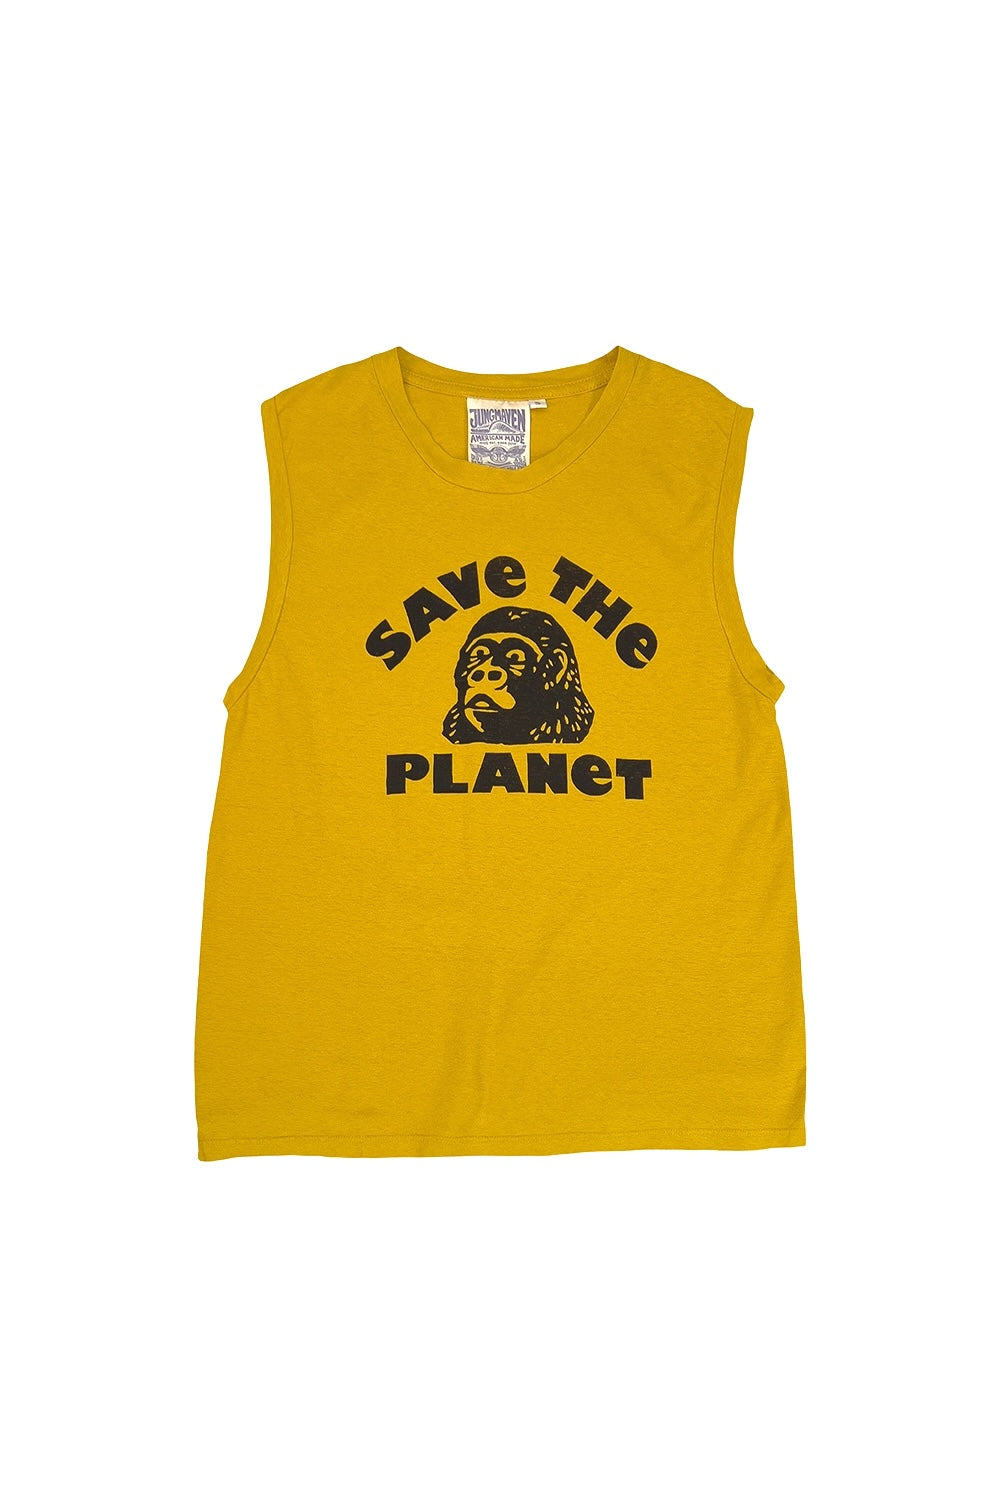 ve the Planet Malibu Muscle Tee | Jungmaven Hemp Clothing & Accessories / Color: Spicy Mustard